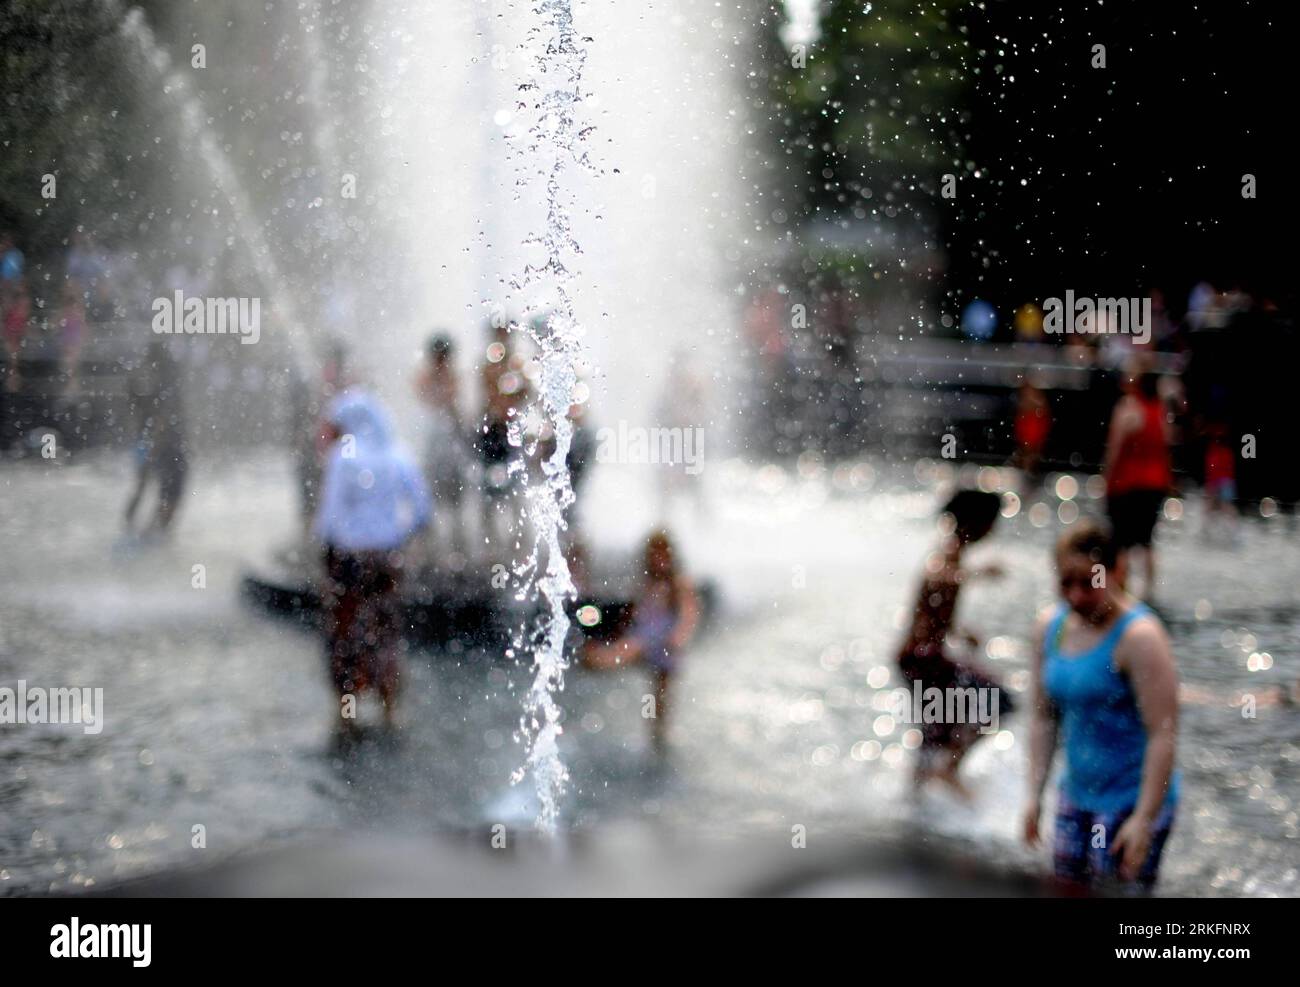 Bildnummer: 55444631  Datum: 09.06.2011  Copyright: imago/Xinhua (110610) -- NEW YORK, June 10, 2011 (Xinhua) -- play in a fountain at Washington Square Park in New York, the United states, June 9,2011. New Yorkers beat the heat for the second day on Thursday as the temperature was soaring.(Xinhua/Shen Hong) USA-NEW YORK-HEAT WAVE PUBLICATIONxNOTxINxCHN Gesellschaft Wetter Hitze Hitzewelle xcb x0x 2011 quer     Bildnummer 55444631 Date 09 06 2011 Copyright Imago XINHUA  New York June 10 2011 XINHUA Play in a Fountain AT Washington Square Park in New York The United States June 9 2011 New Yorke Stock Photo